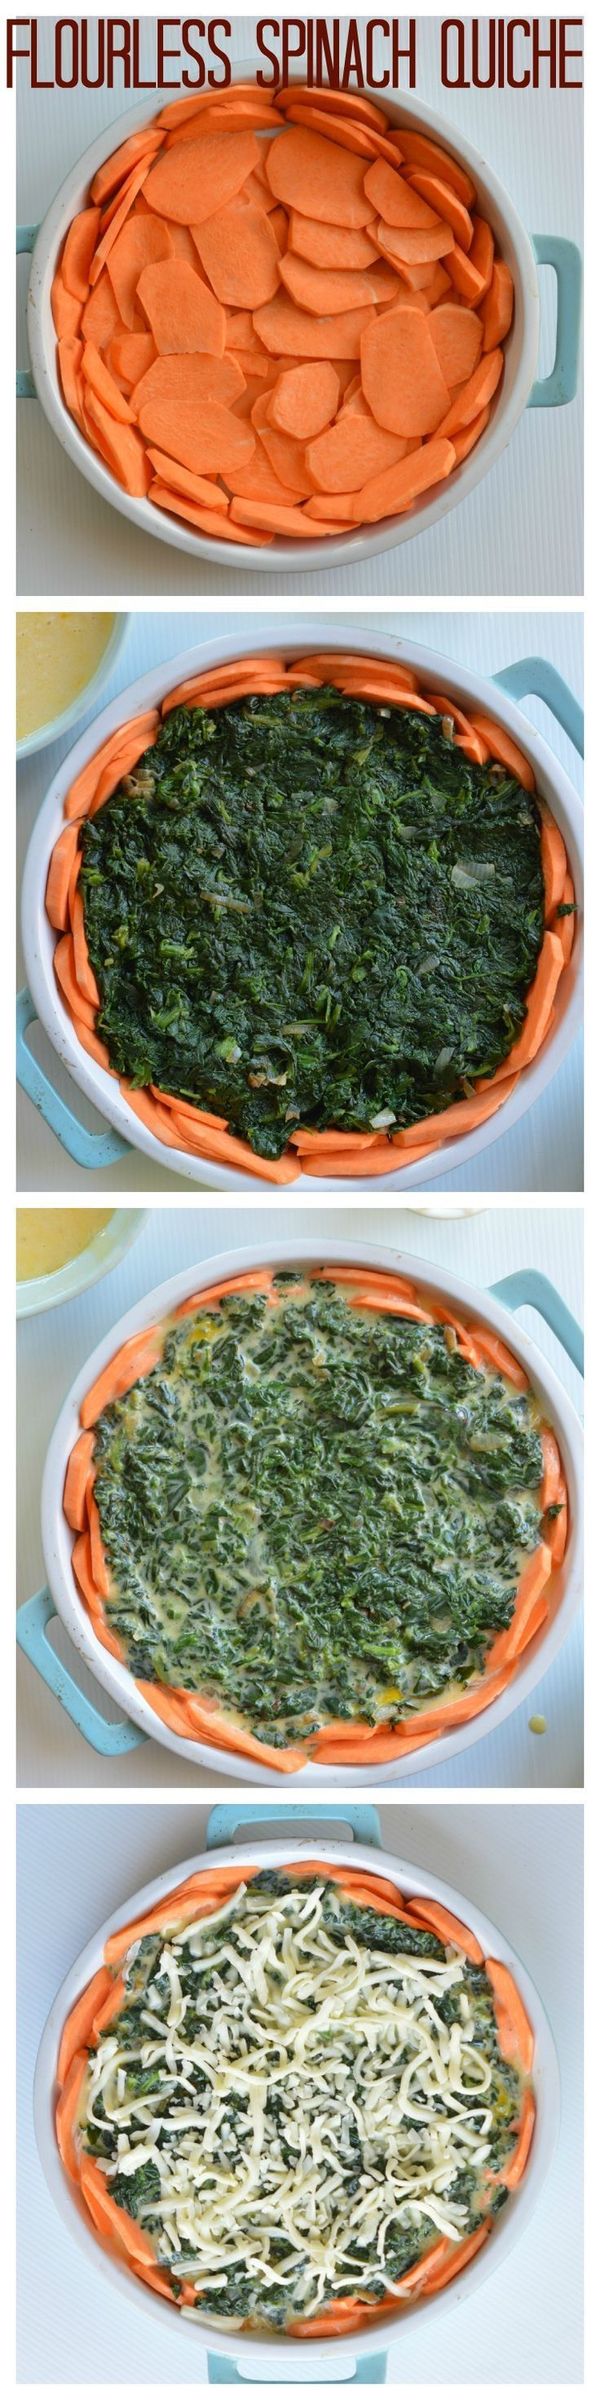 Sweet potatoes crusted spinach quiche